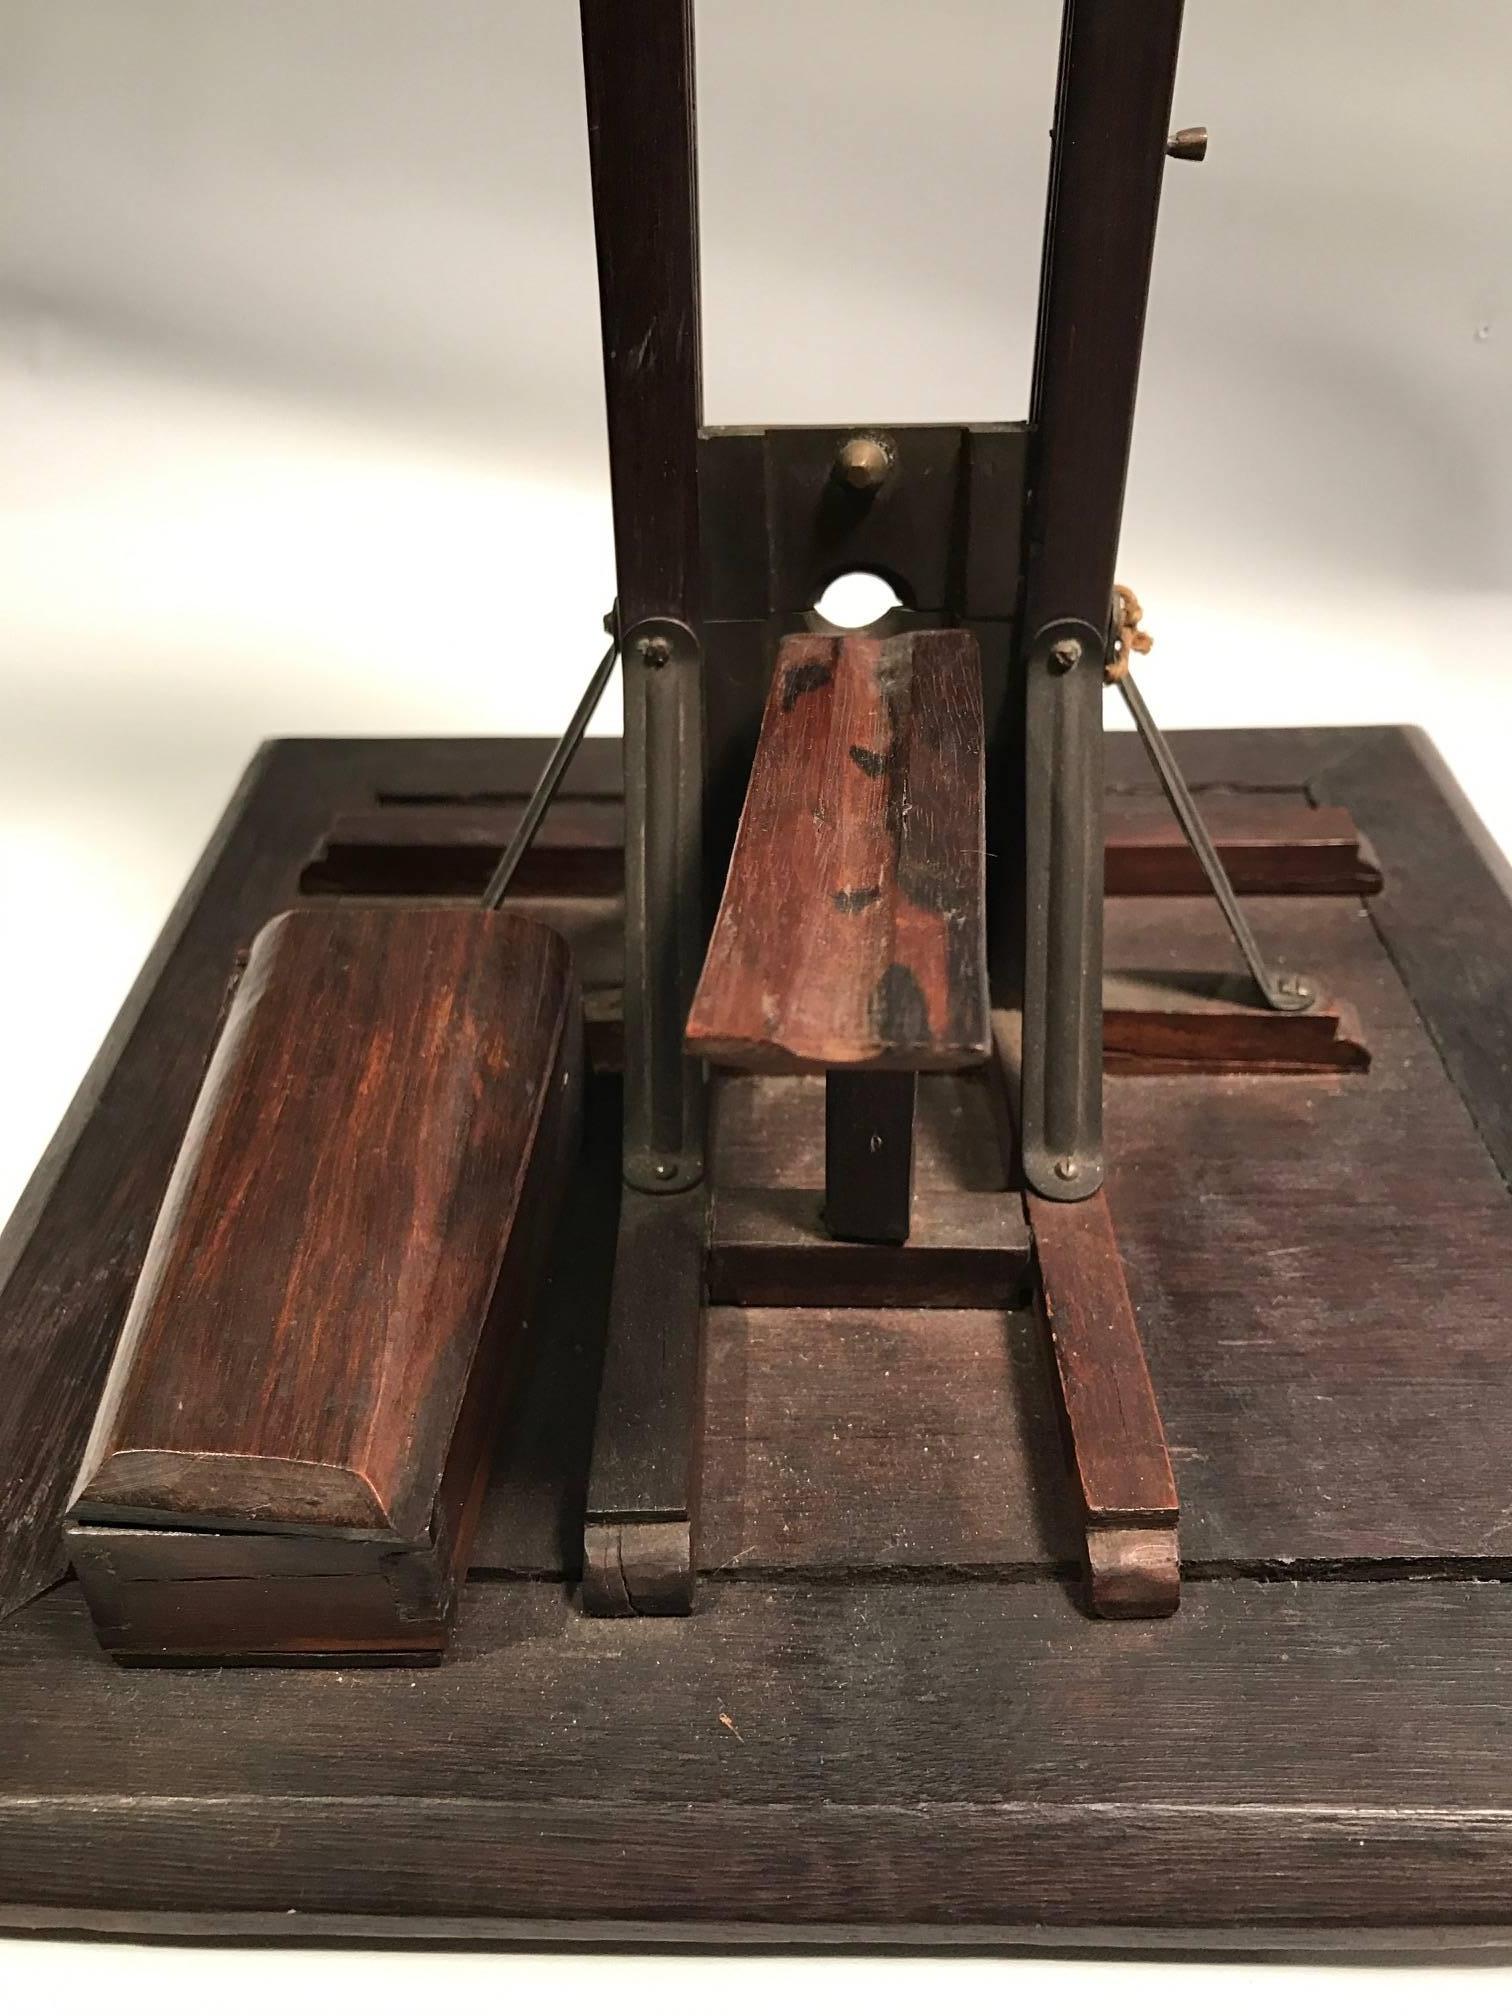 Guillotine cigar cutter with coffin cigar tip box, French late 19th-early 20th century. It was in 1789, when the physician Joseph-Ignace Guillotin, recommended the use of this type of Apparatus for executions in France. The most notable beheading